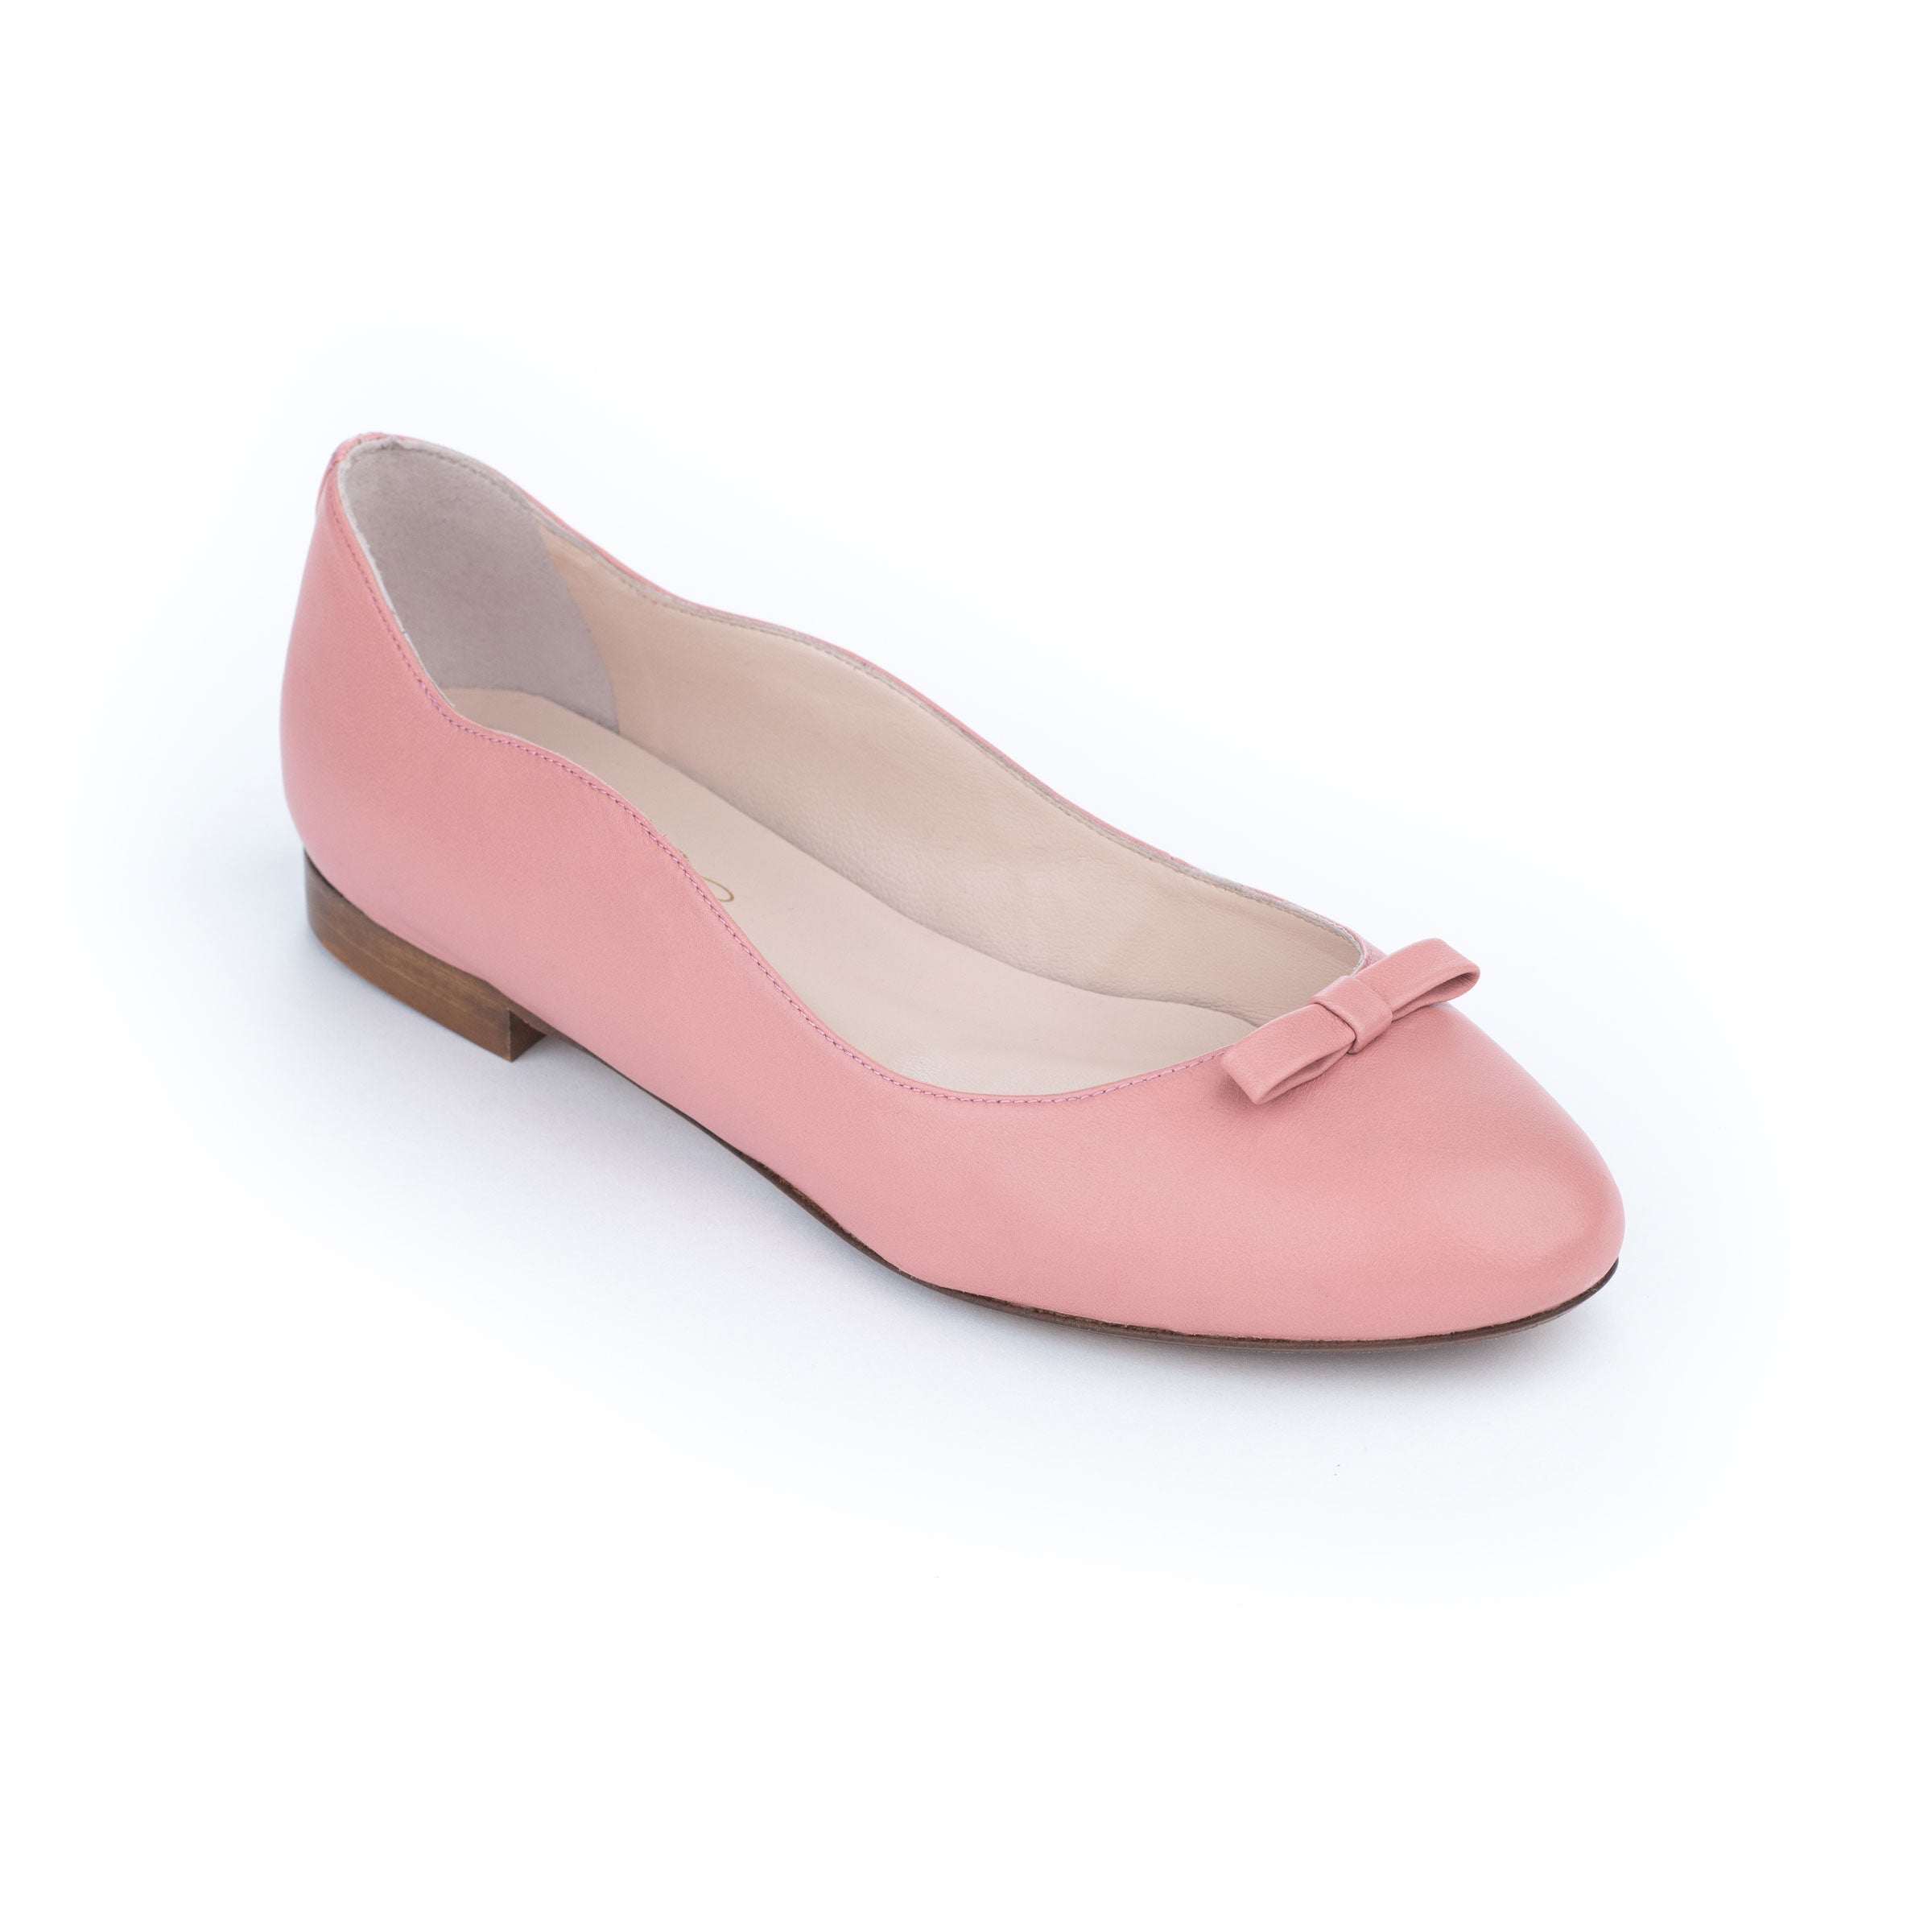 oleah shoes rose pink comfortable ballerina flats side view